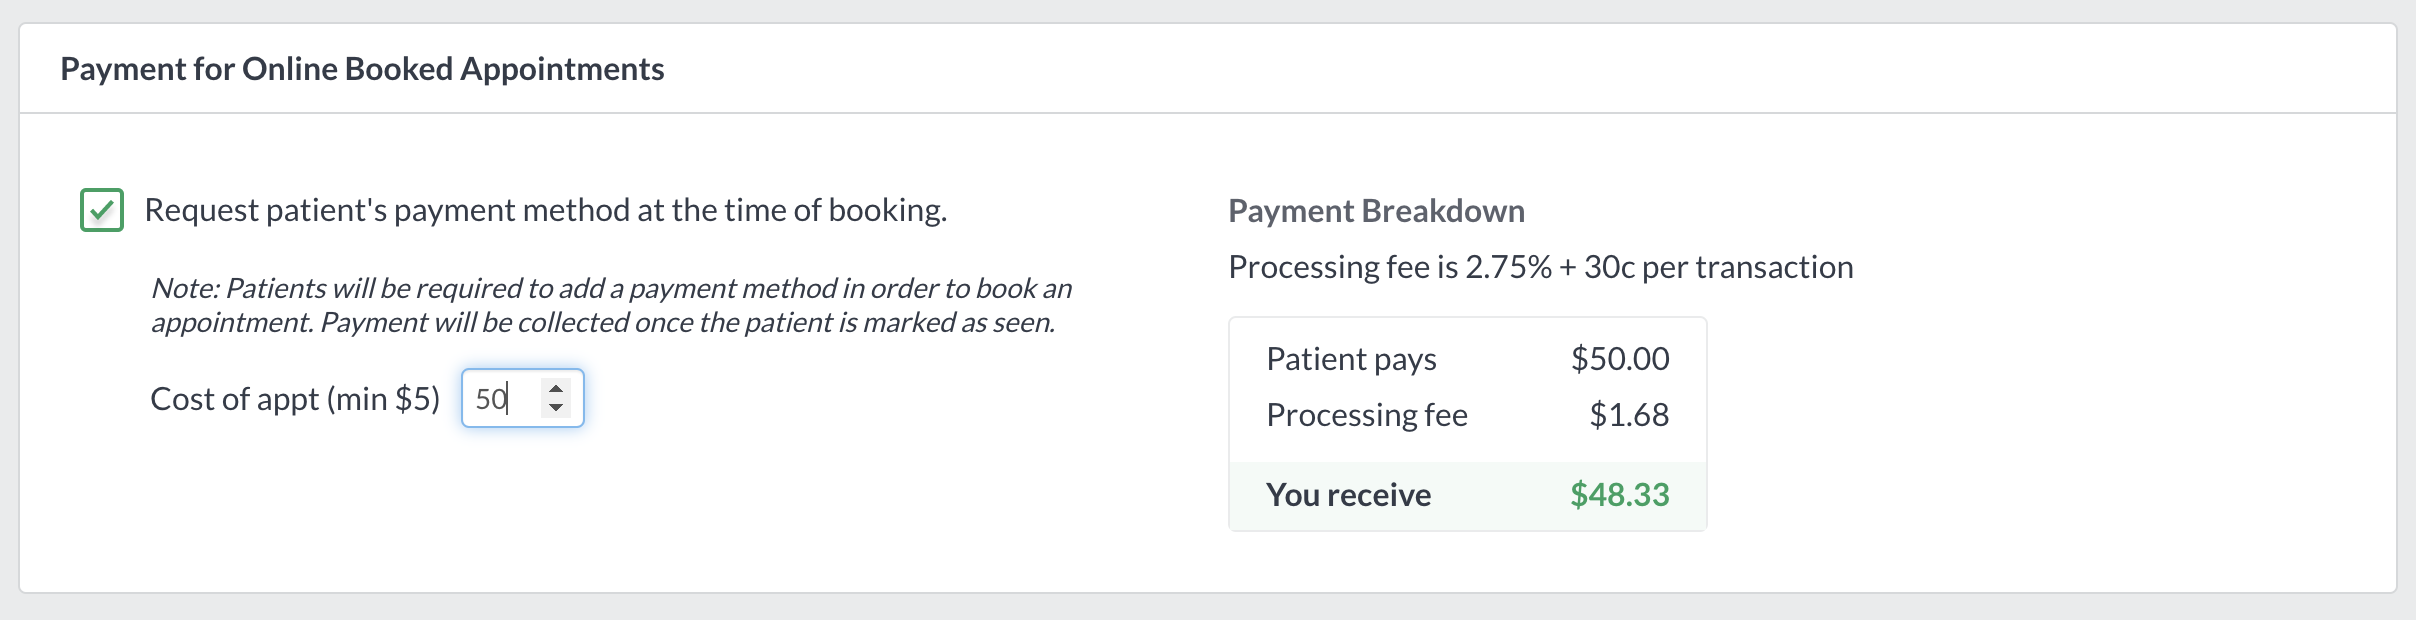 payment_method_at_time_of_booking.png